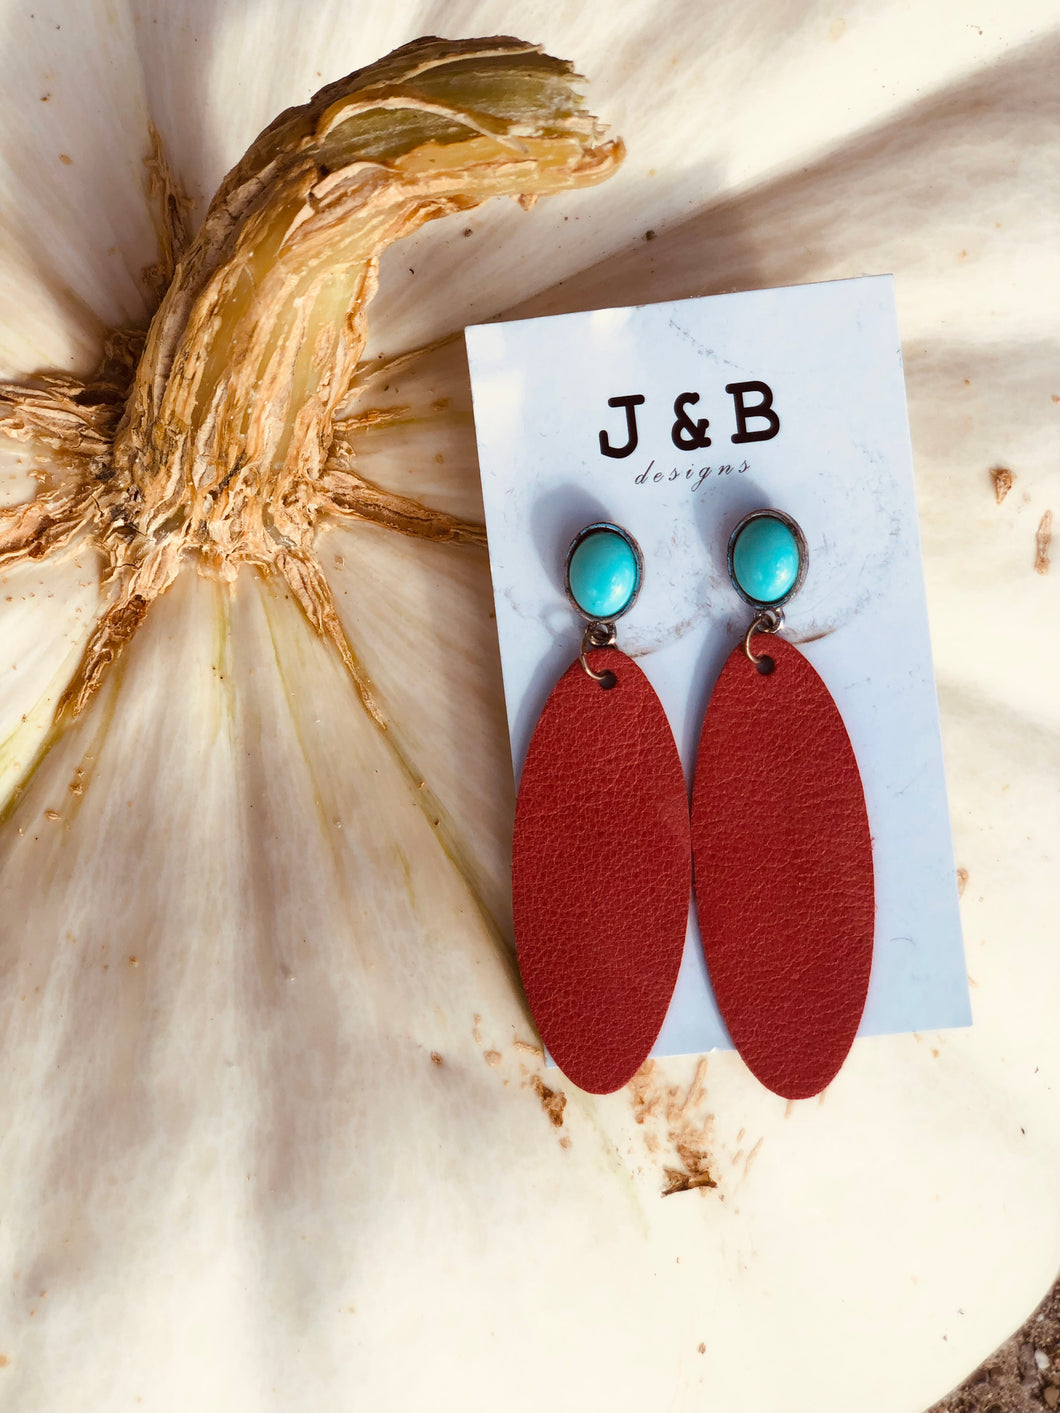 Turquoise and red leather earrings